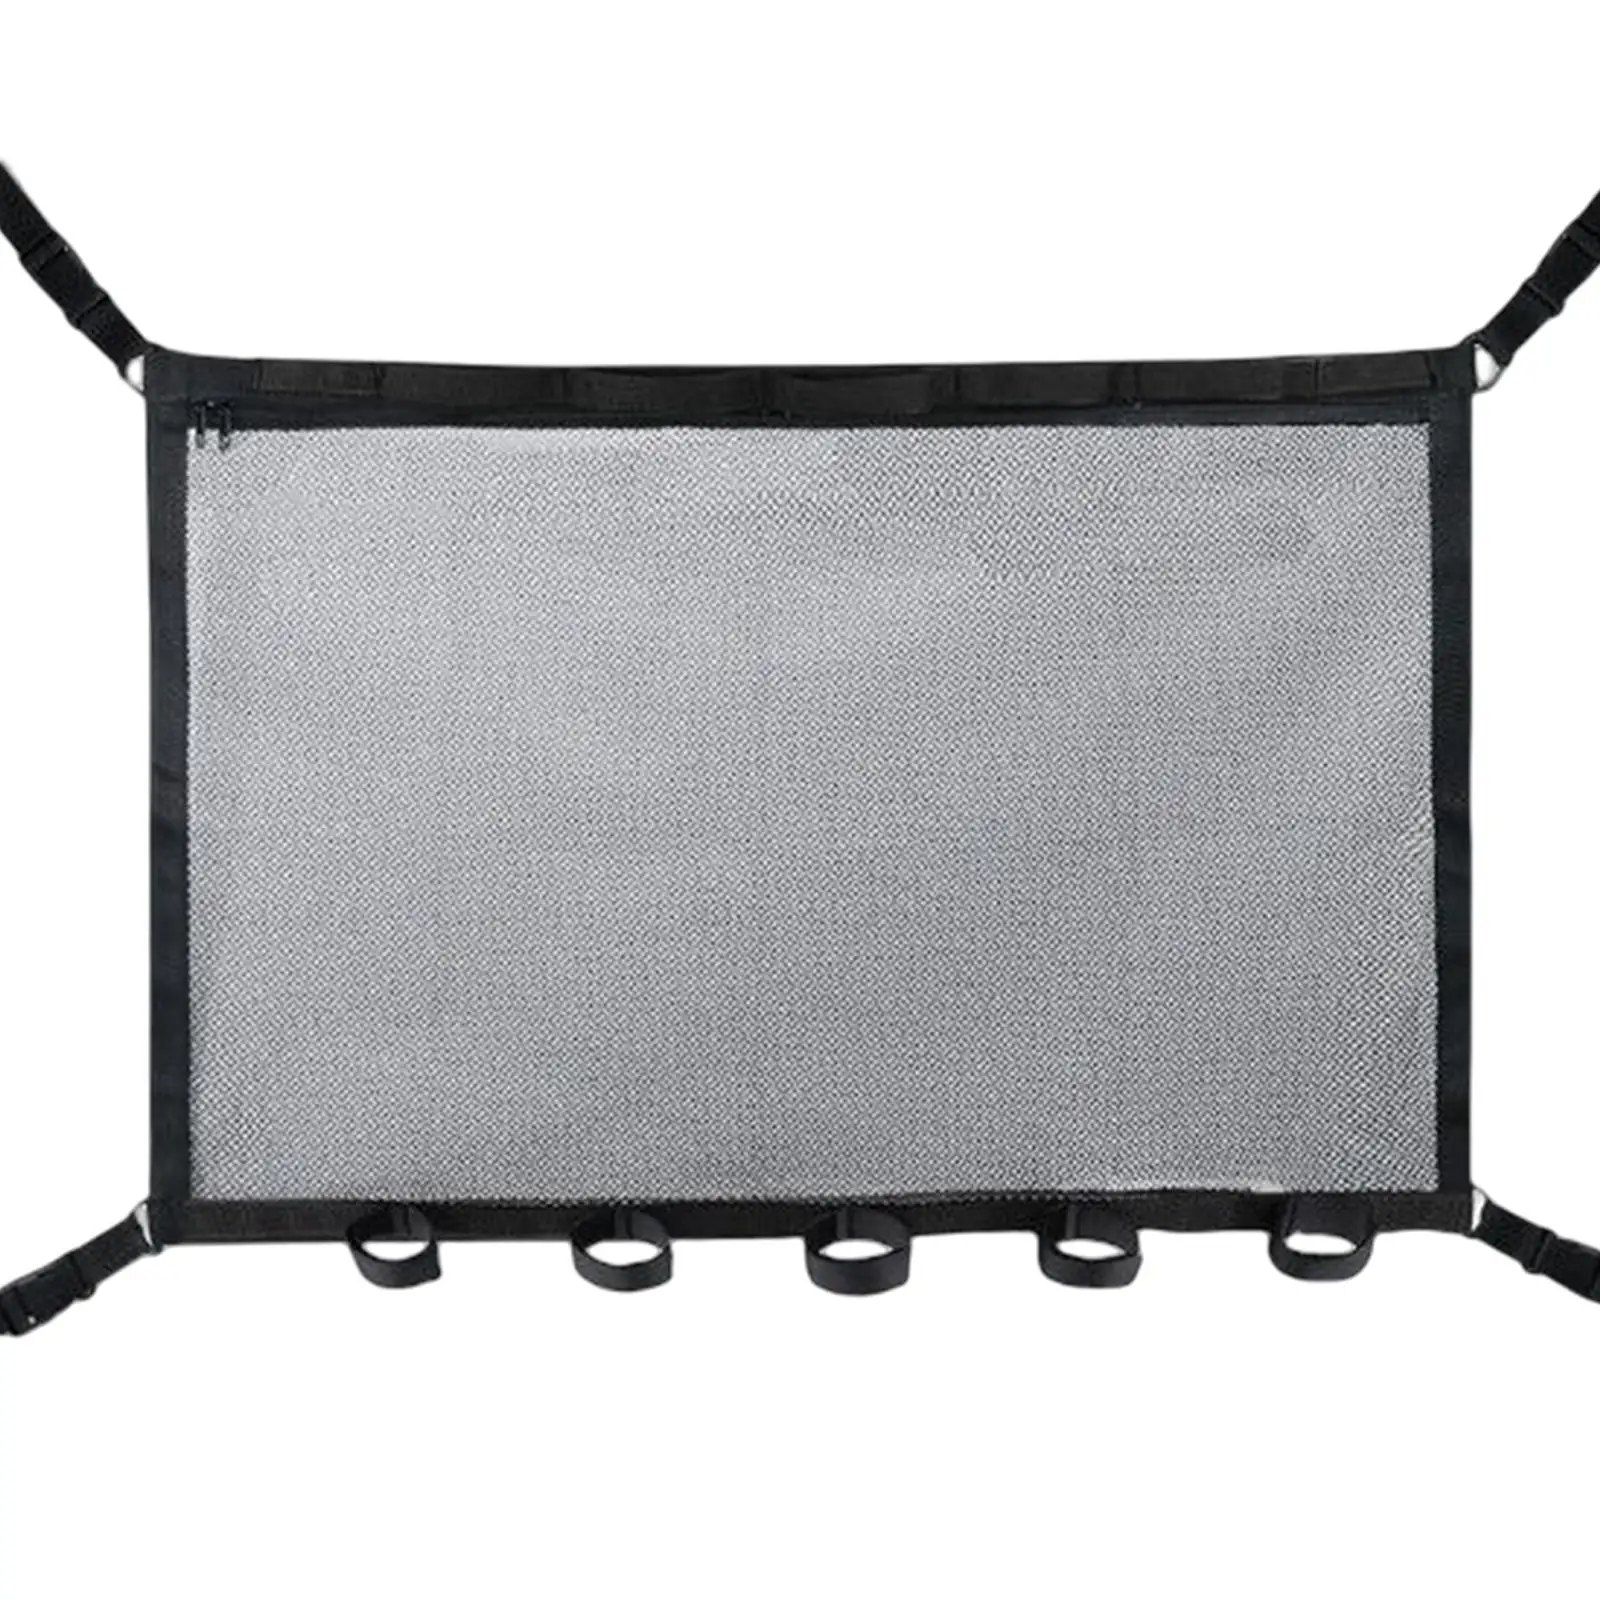 Car Ceiling Net Fishing Rod Holder Interior Accessories Mesh Car Roof Organizer for Toys